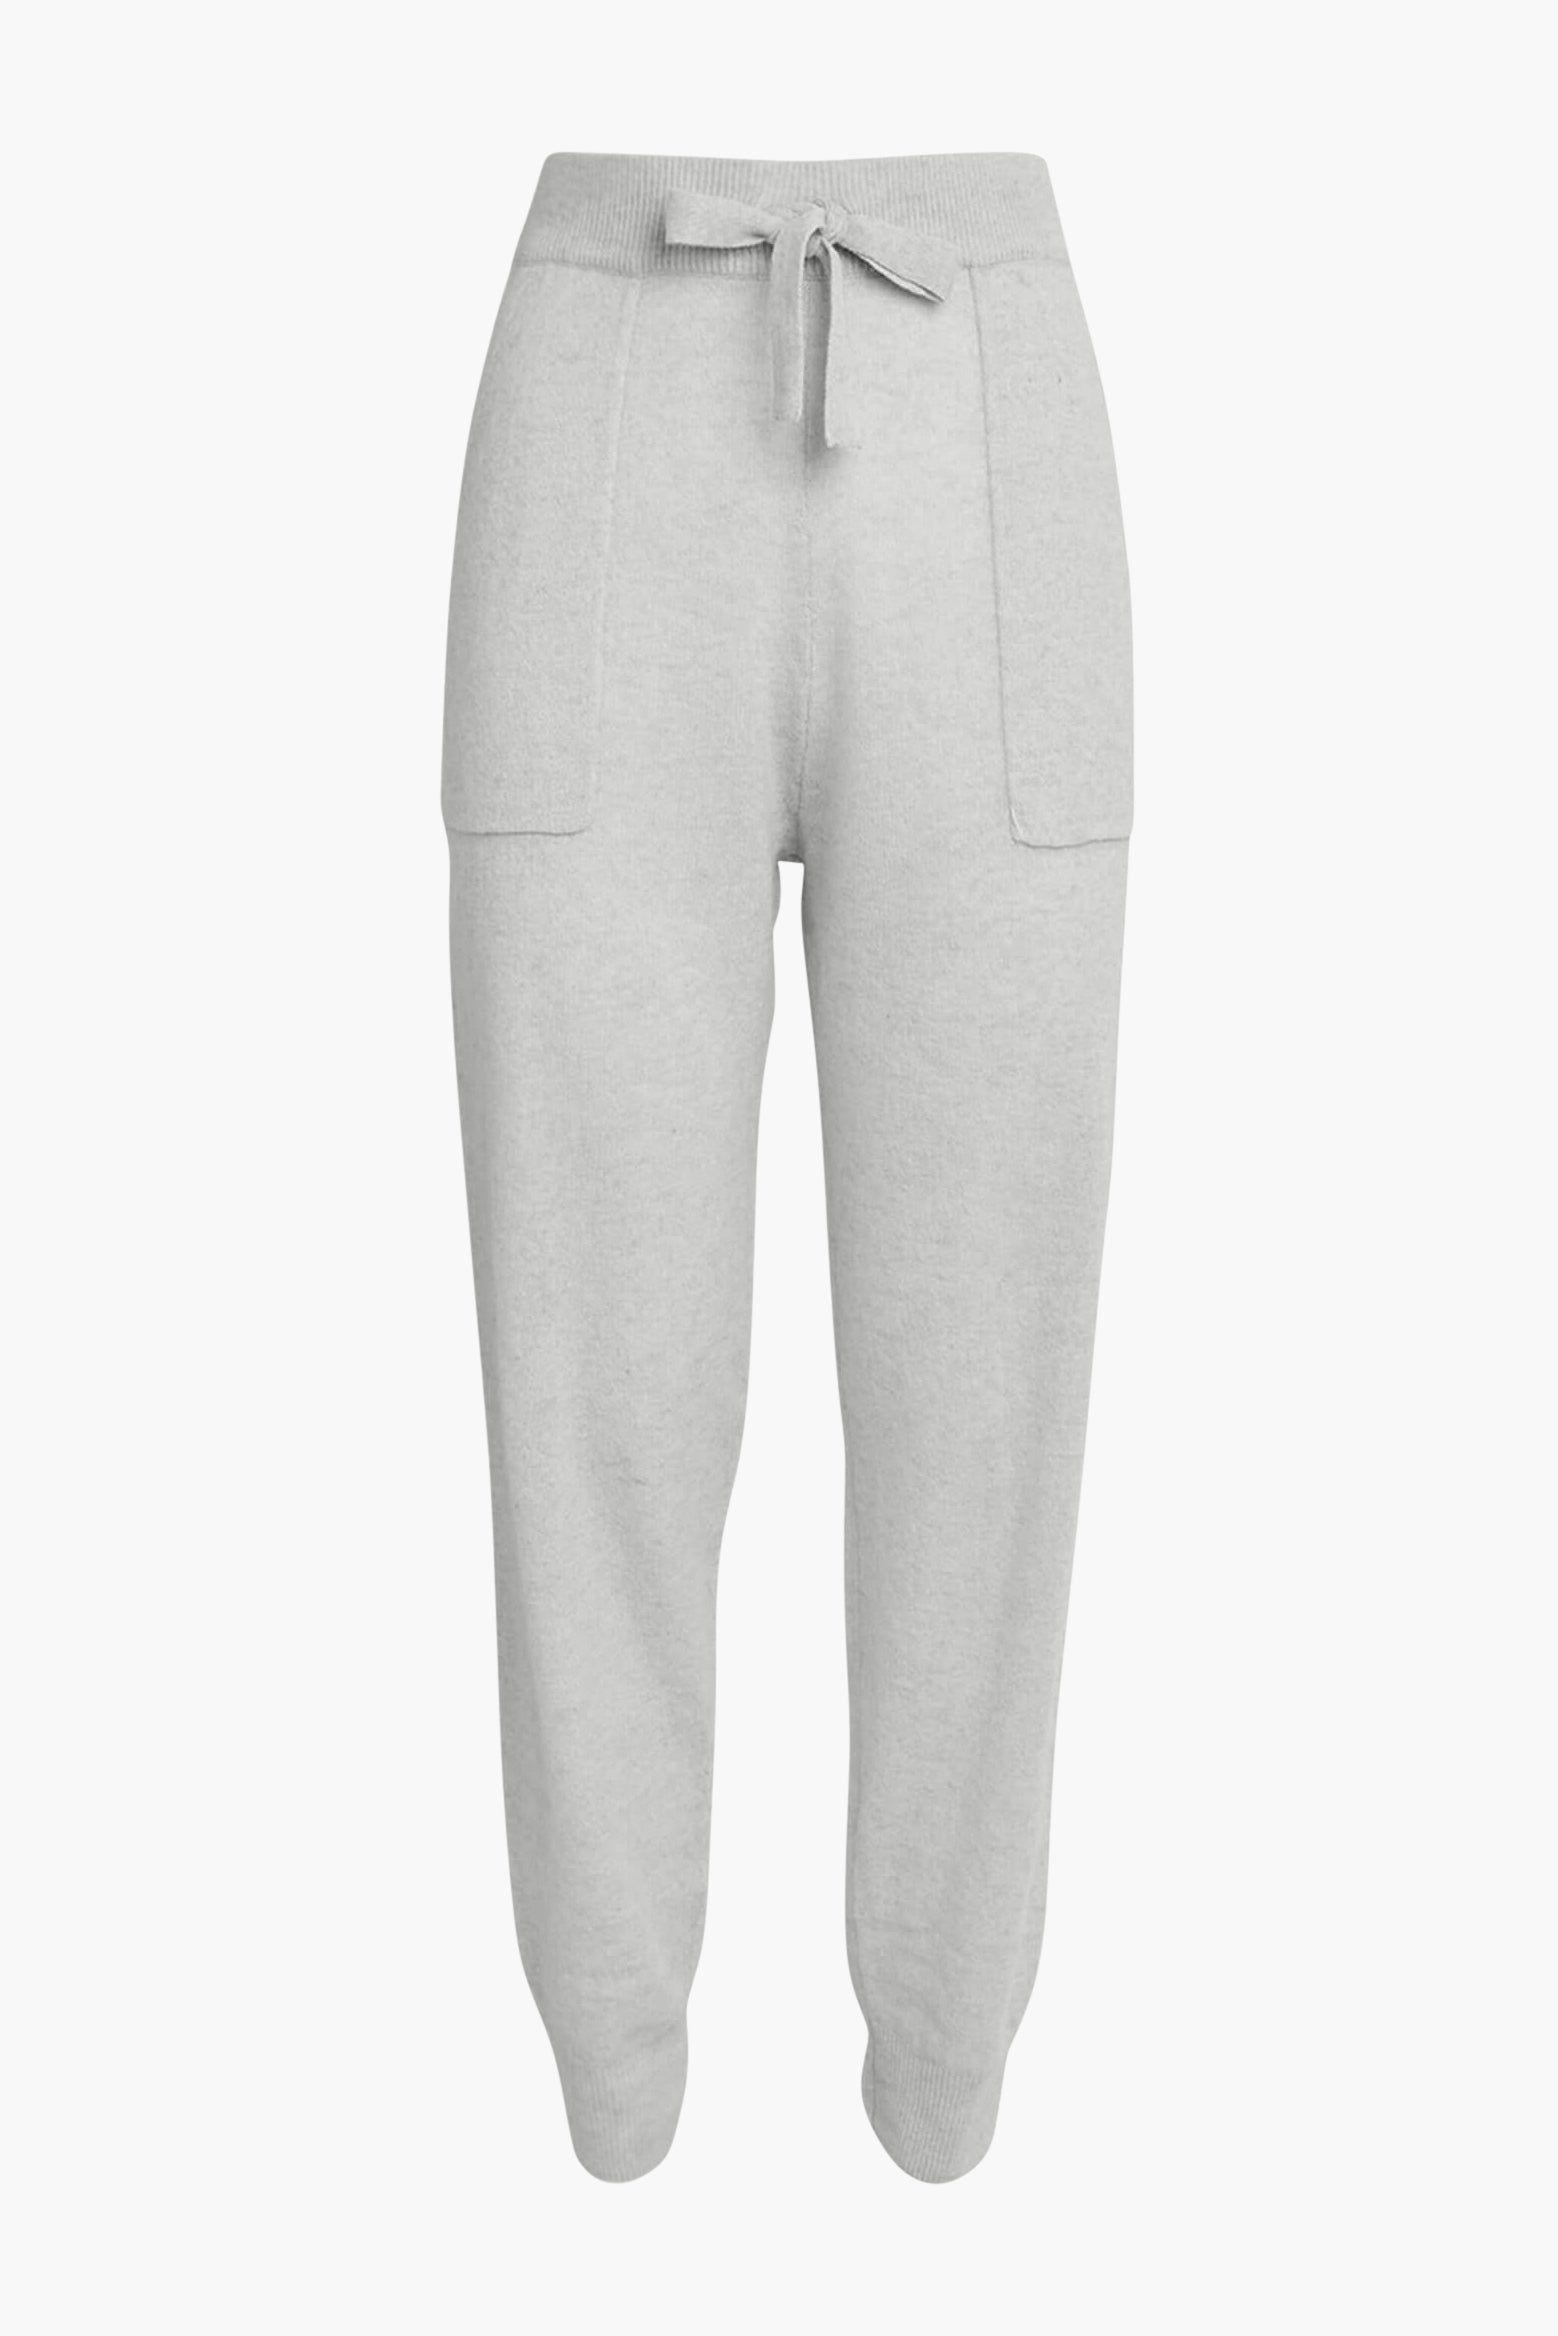 Crush Cashmere Faro Chill Joggers in Fluffy Grey available at TNT The New Trend Australia.